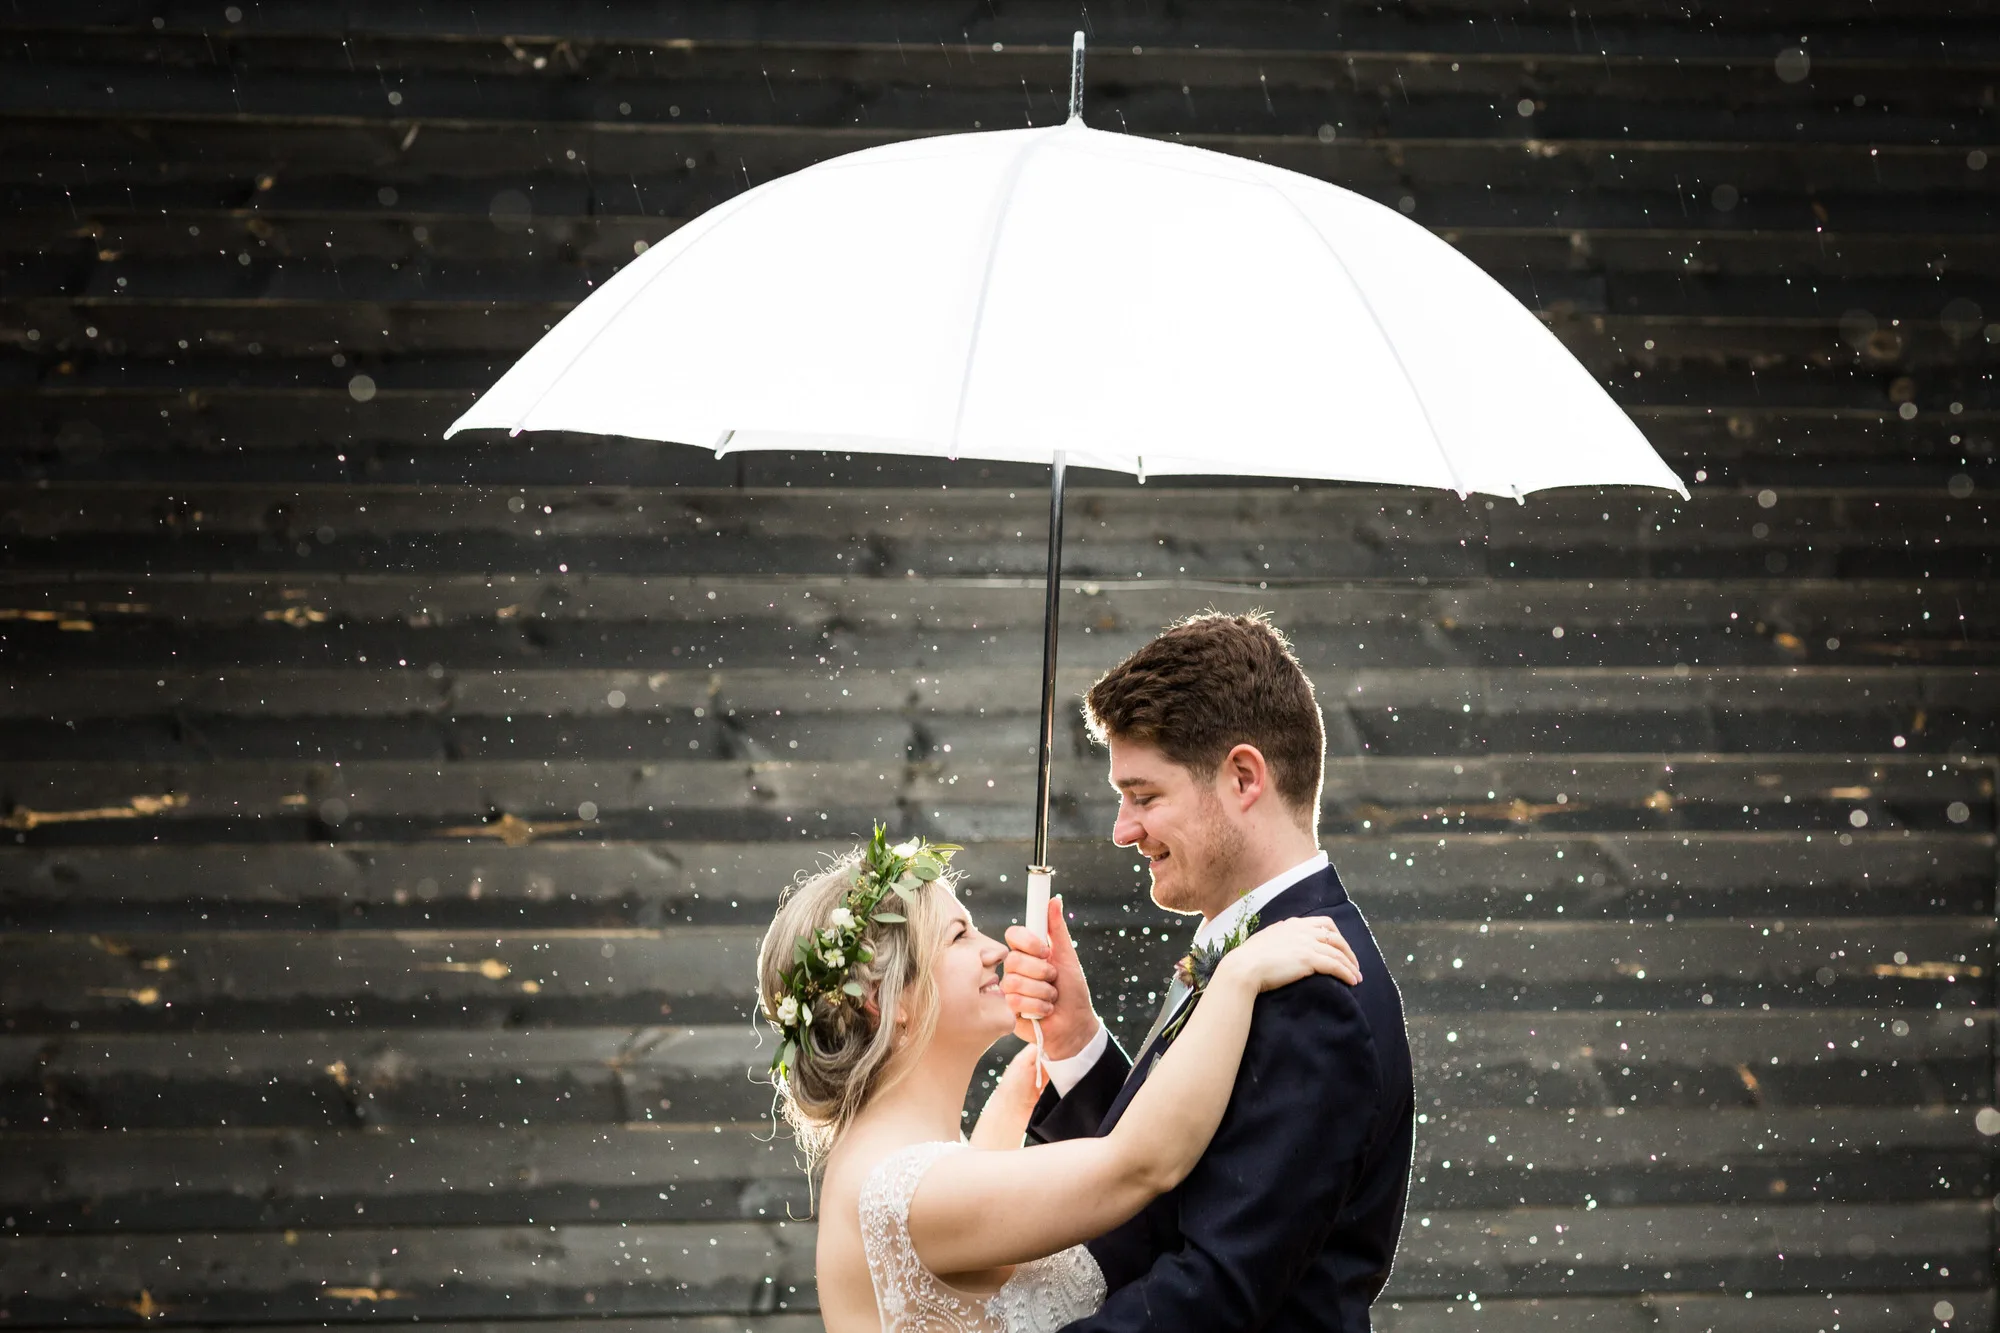 Professional Wedding Photography - bride and groom in the rain at their barn wedding in East Sussex.